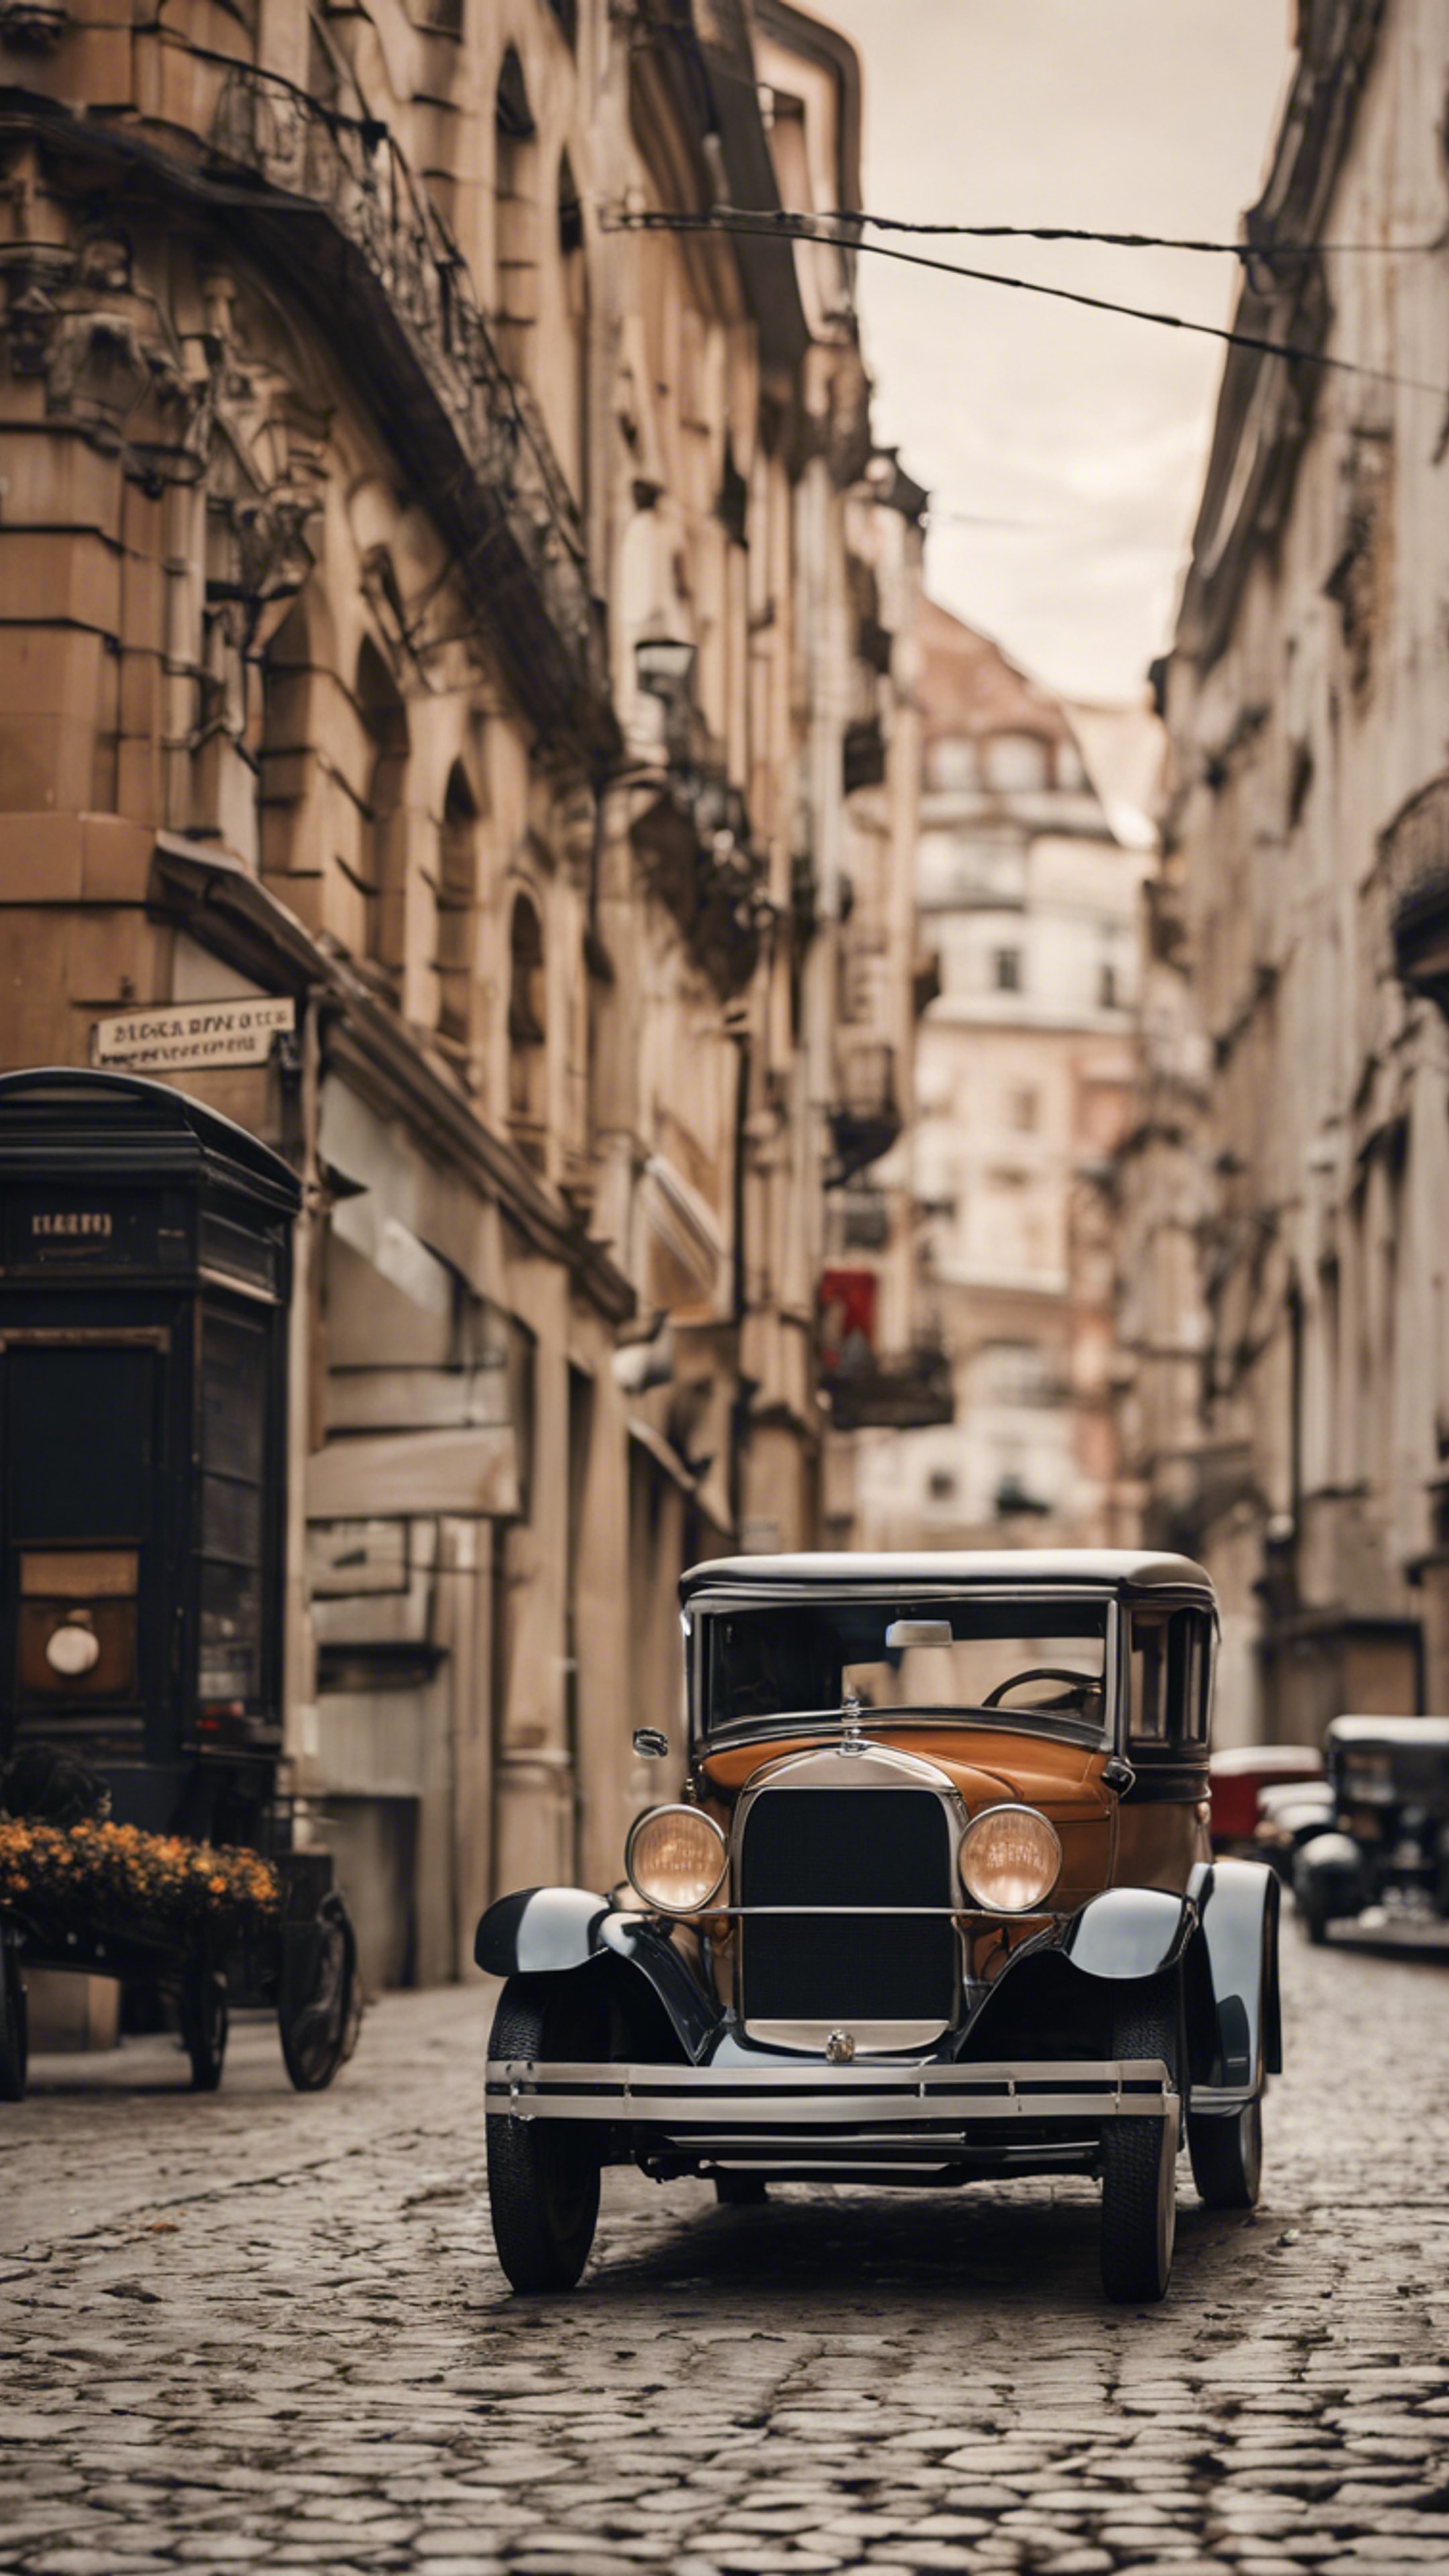 A nostalgic cityscape in the 1920s with classic cars and cobblestone streets. טפט[d252acda6f644acf85b4]